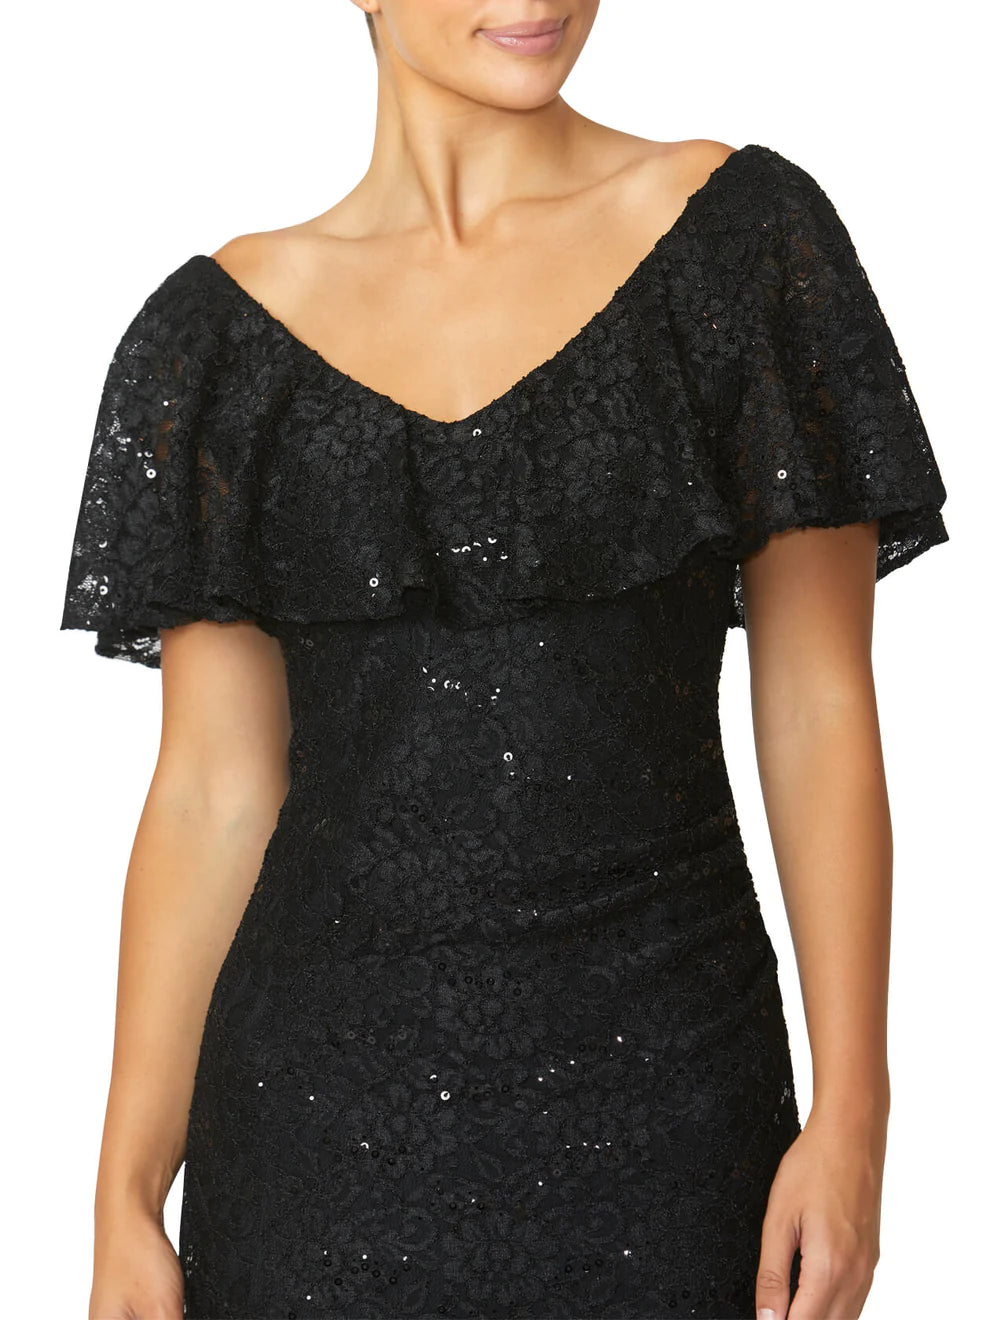 Anthea Crawford Trudy Sequin Lace Gown - Black